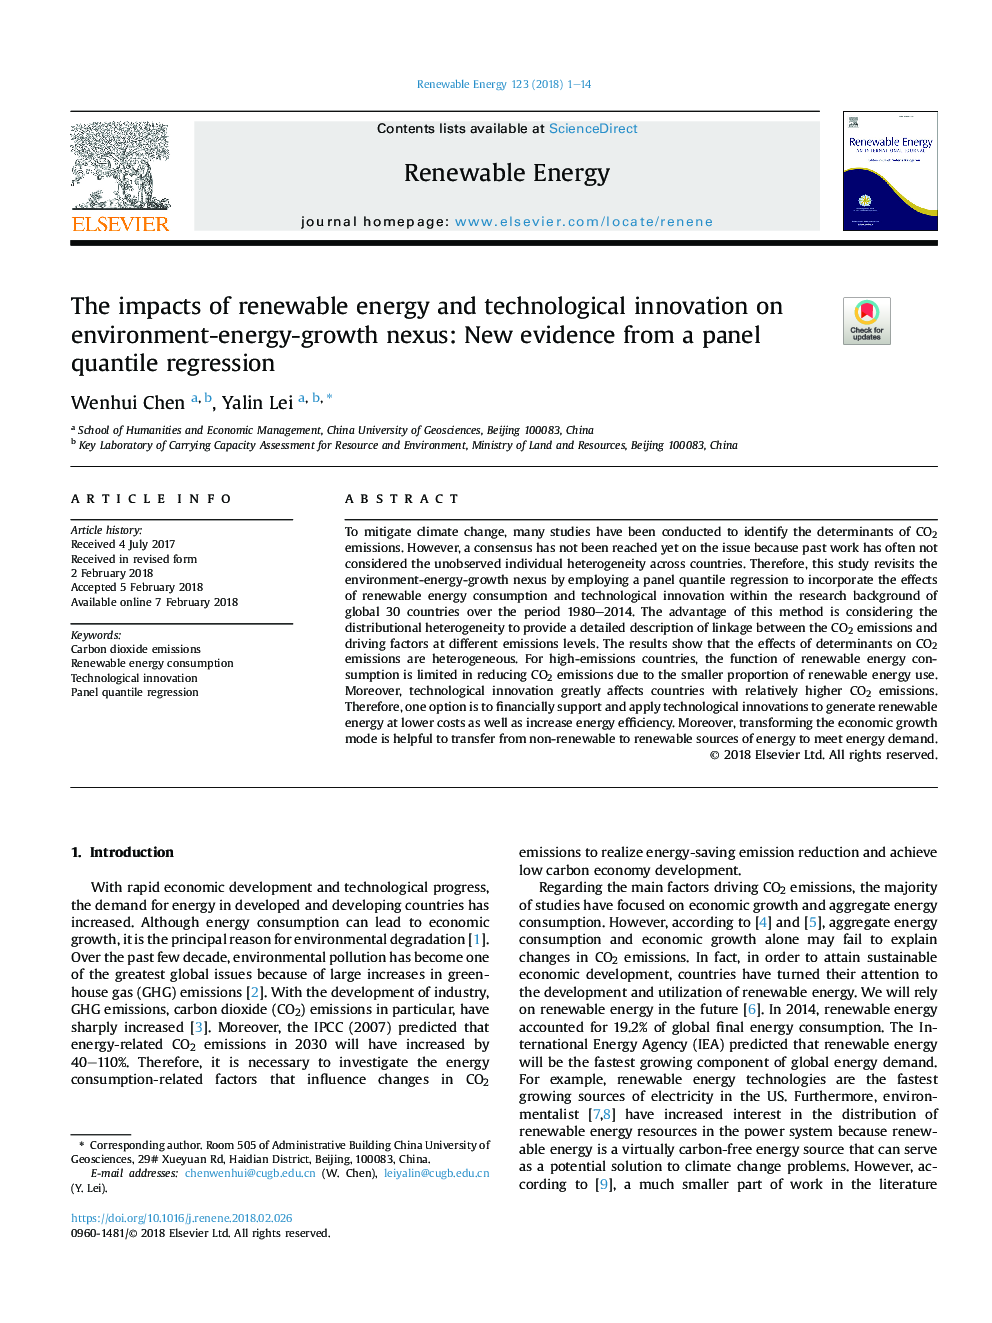 The impacts of renewable energy and technological innovation on environment-energy-growth nexus: New evidence from a panel quantile regression